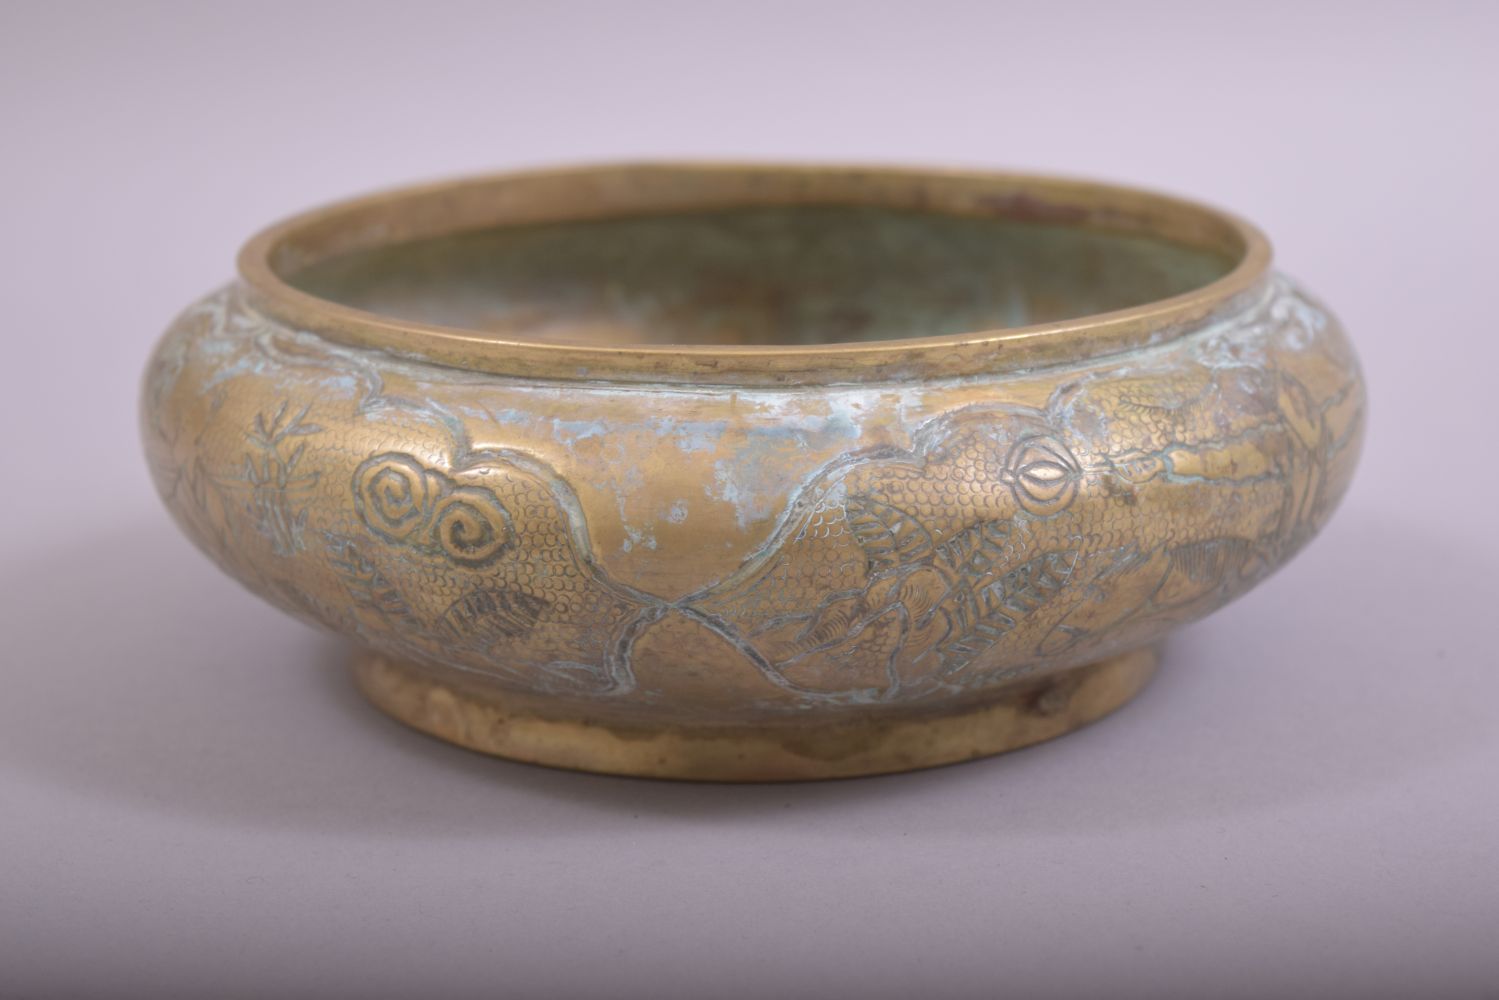 A CHINESE EMBOSSED AND CHASED BRONZE BOWL, with scenes of men on horseback in outdoor settings, - Image 4 of 7